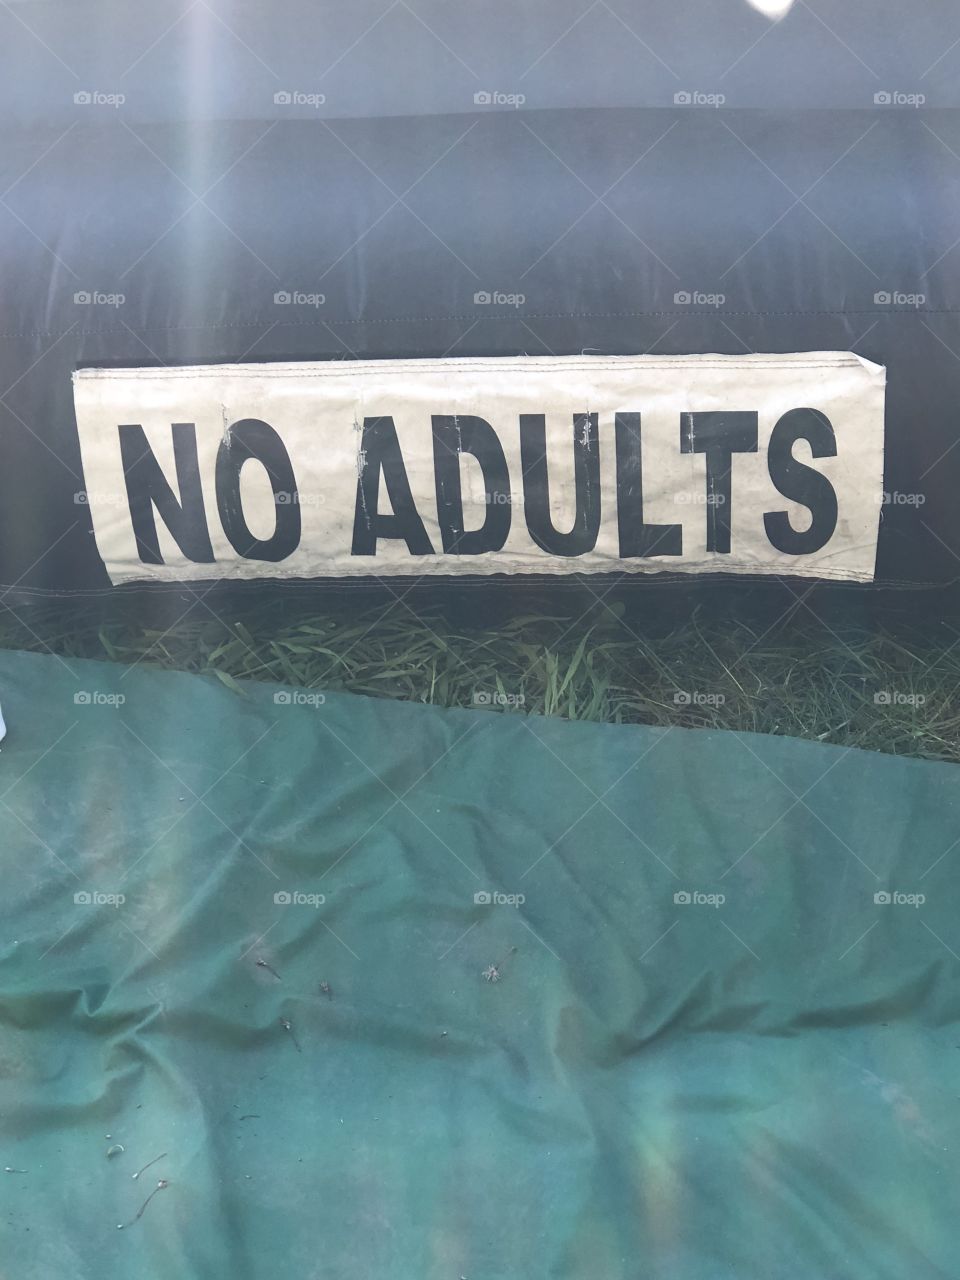 No adults sign